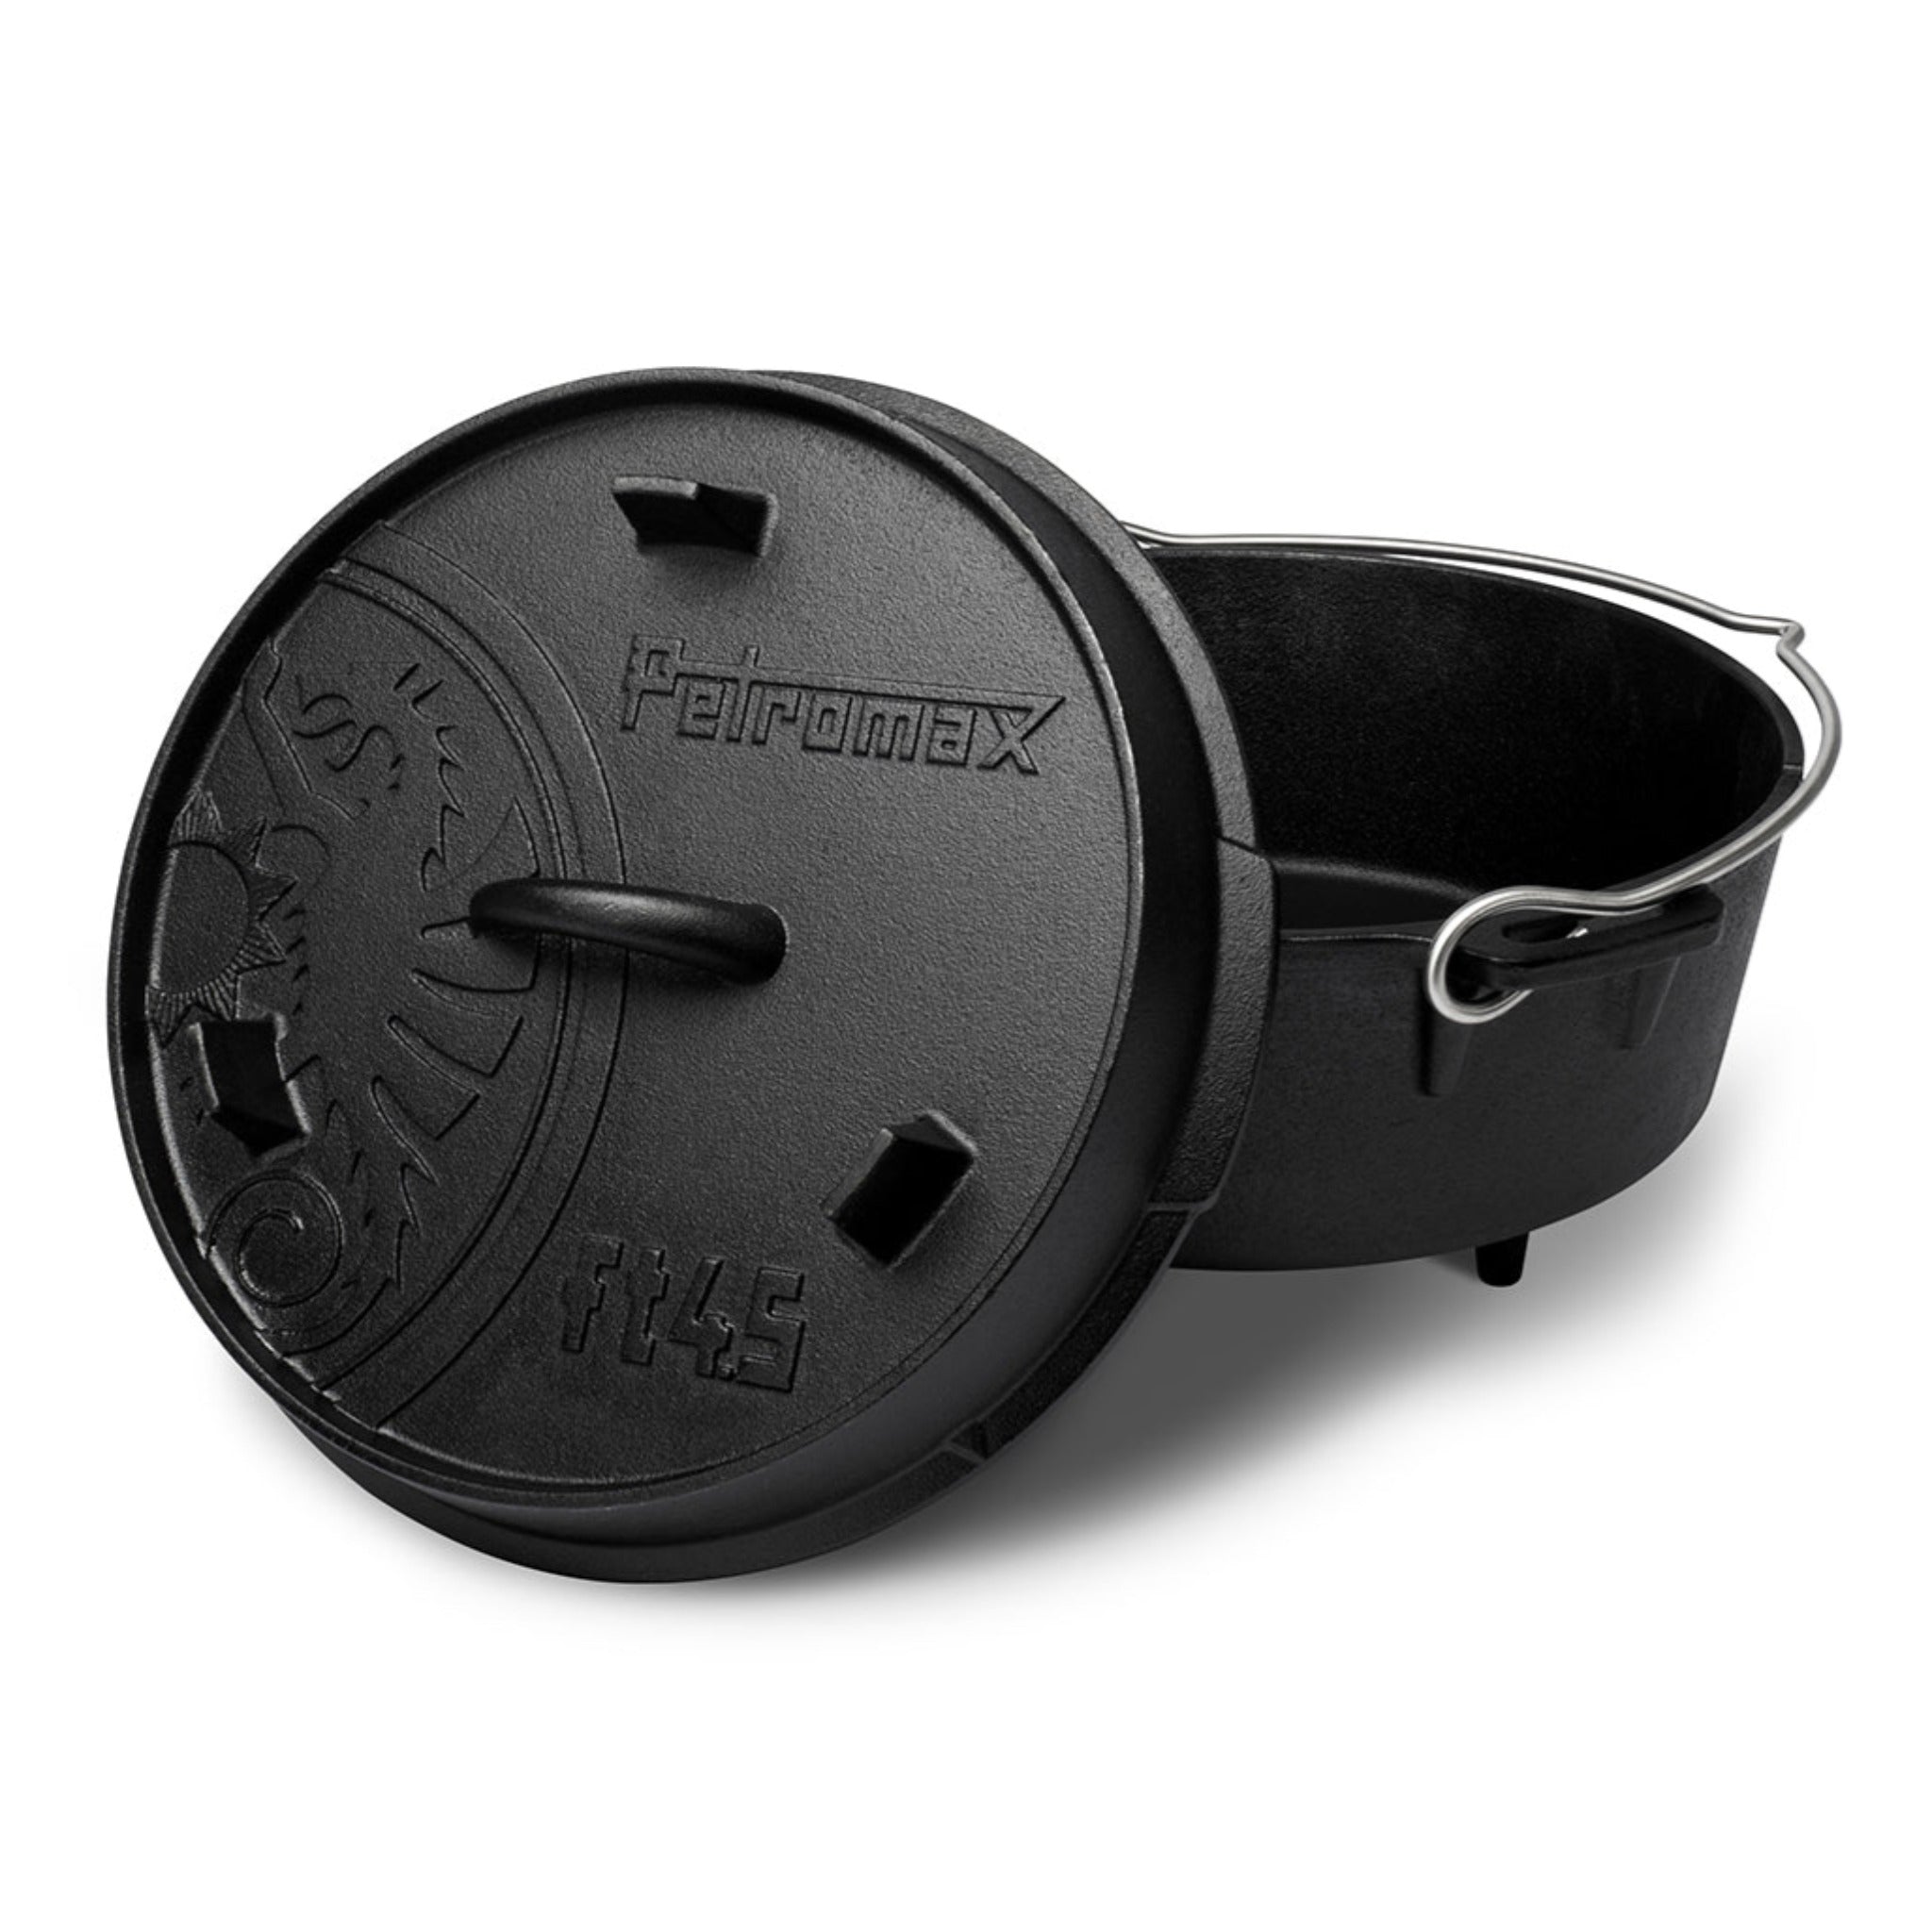 Petromax Dutch Oven ft4.5 with feet